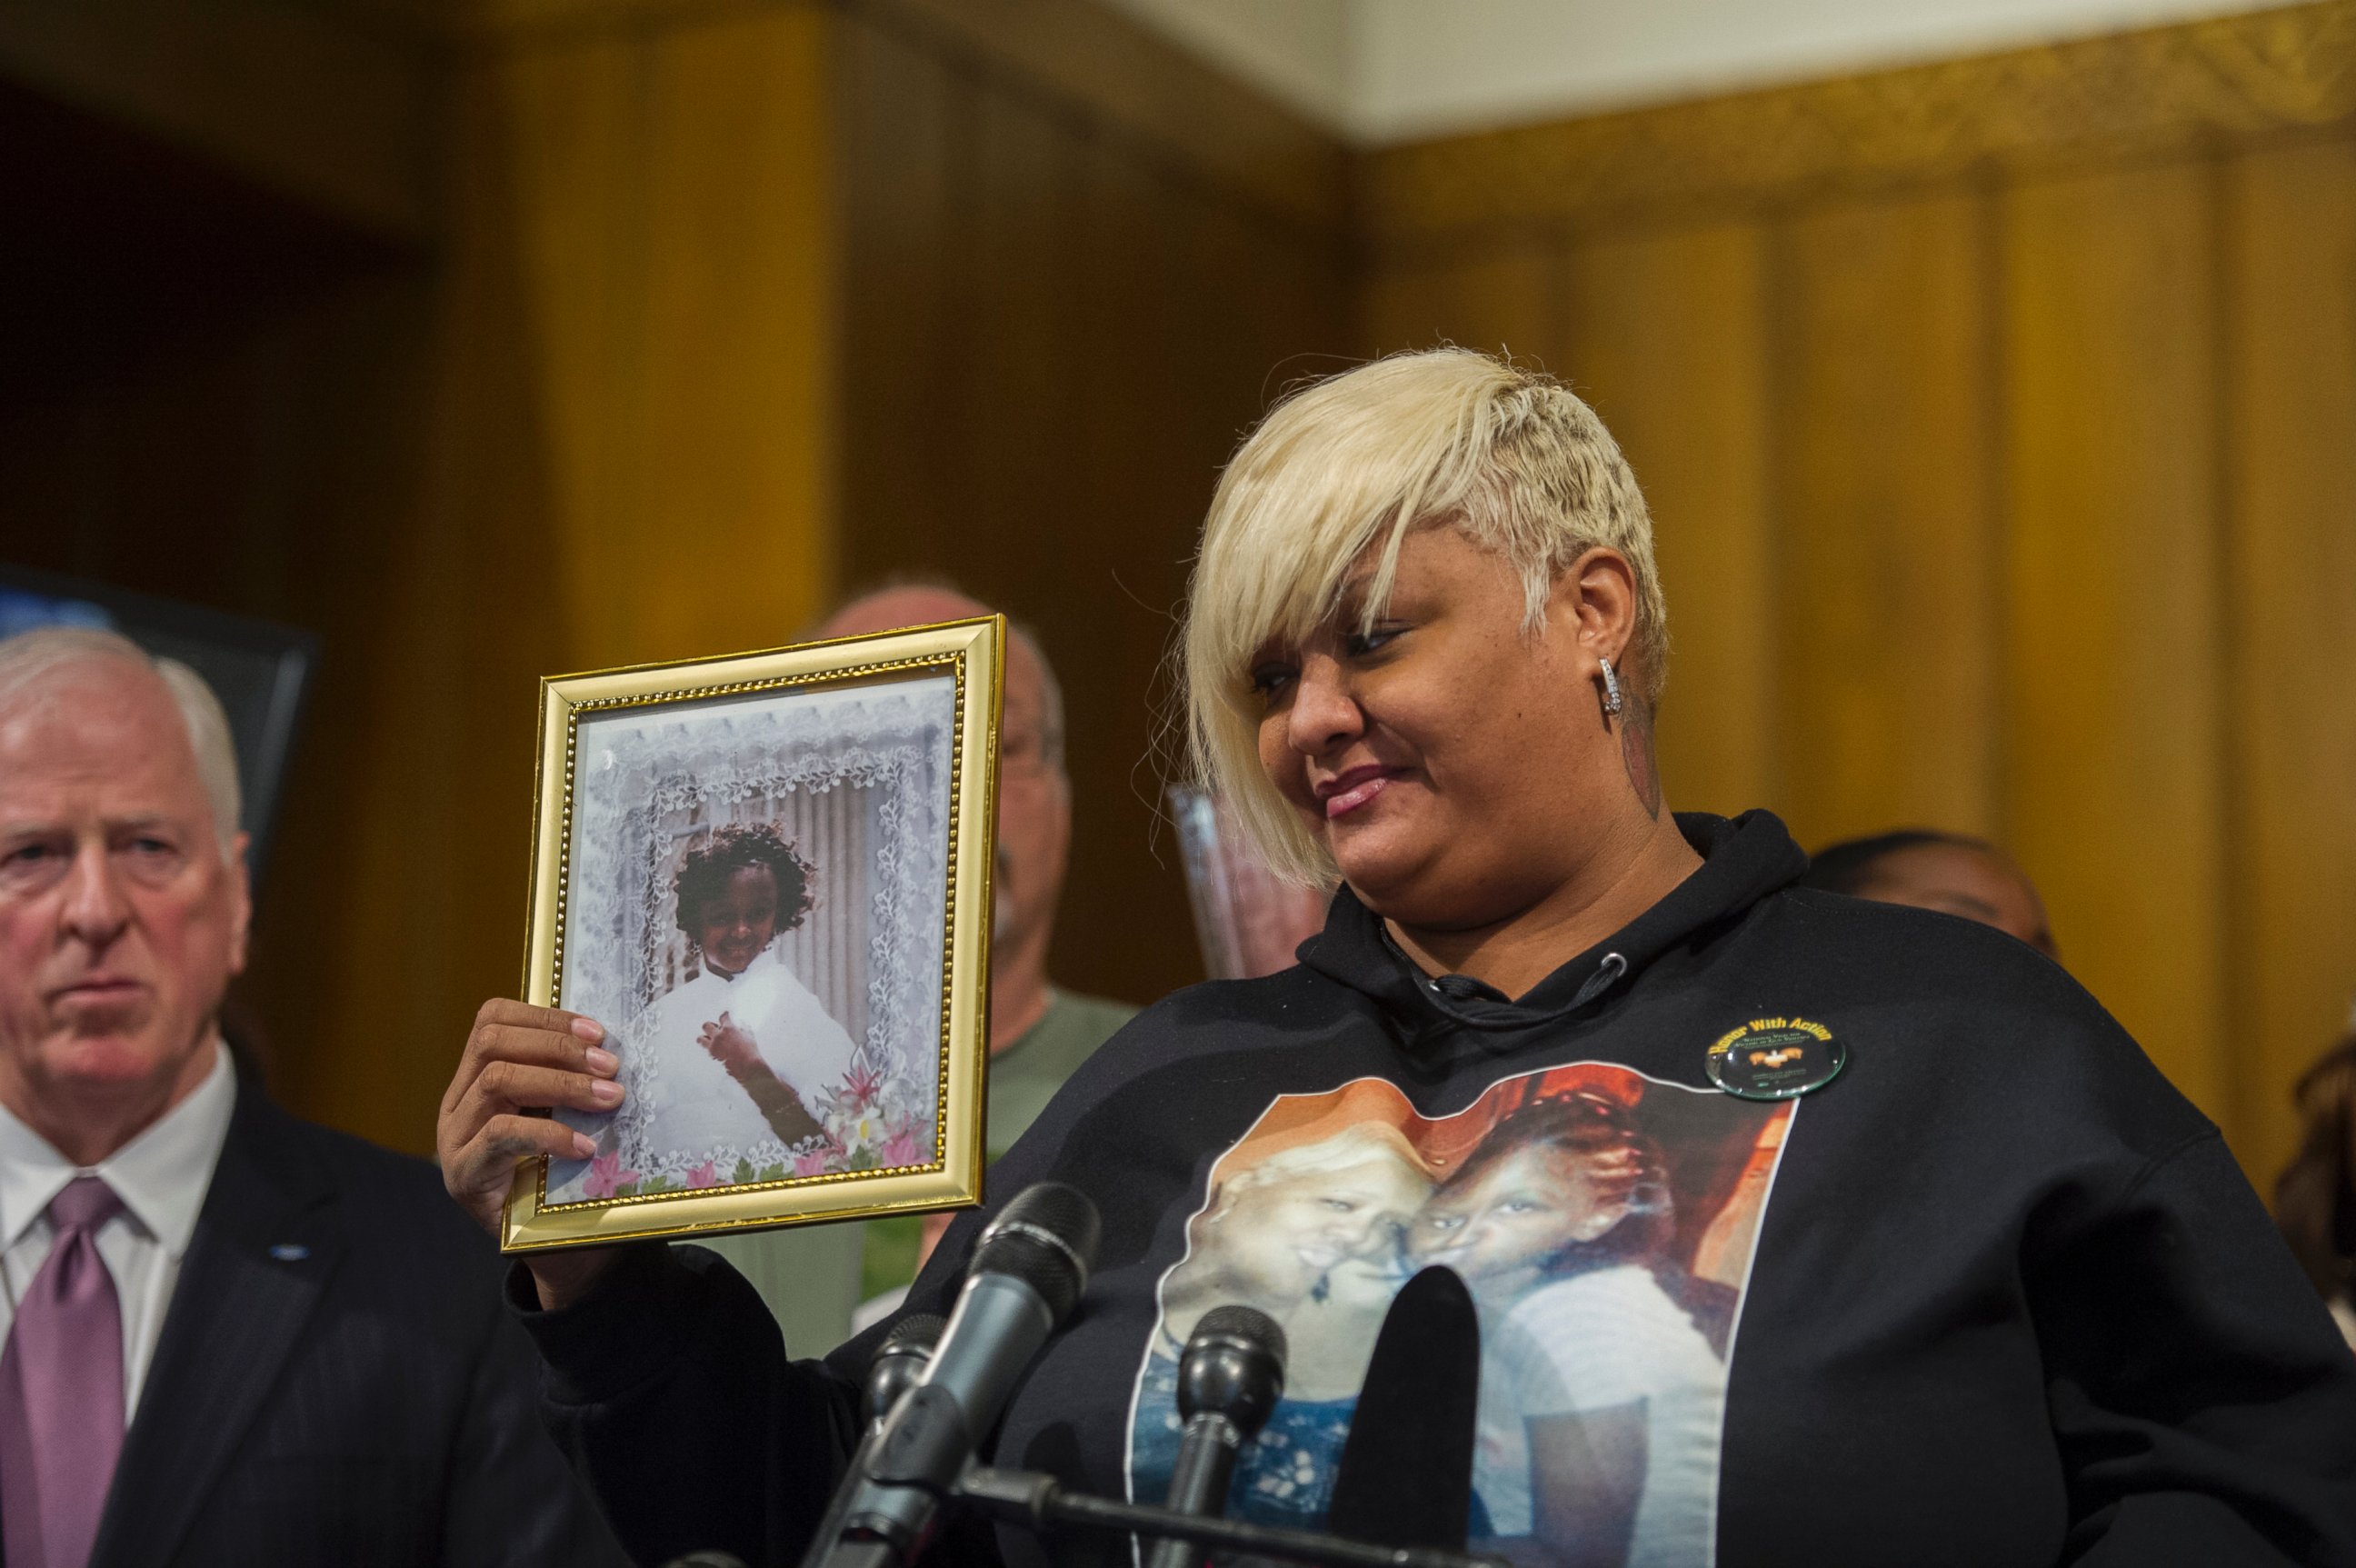 PHOTO: WASHINGTON, DC - DECEMBER 11: Ashake Banks, of Chicago Illinois, introduces herself to the audience as she holds a photo of her daughter Heaven Sutton, 7, who was shot by a stray bullet on Chicago's west side on June 27, 2012.